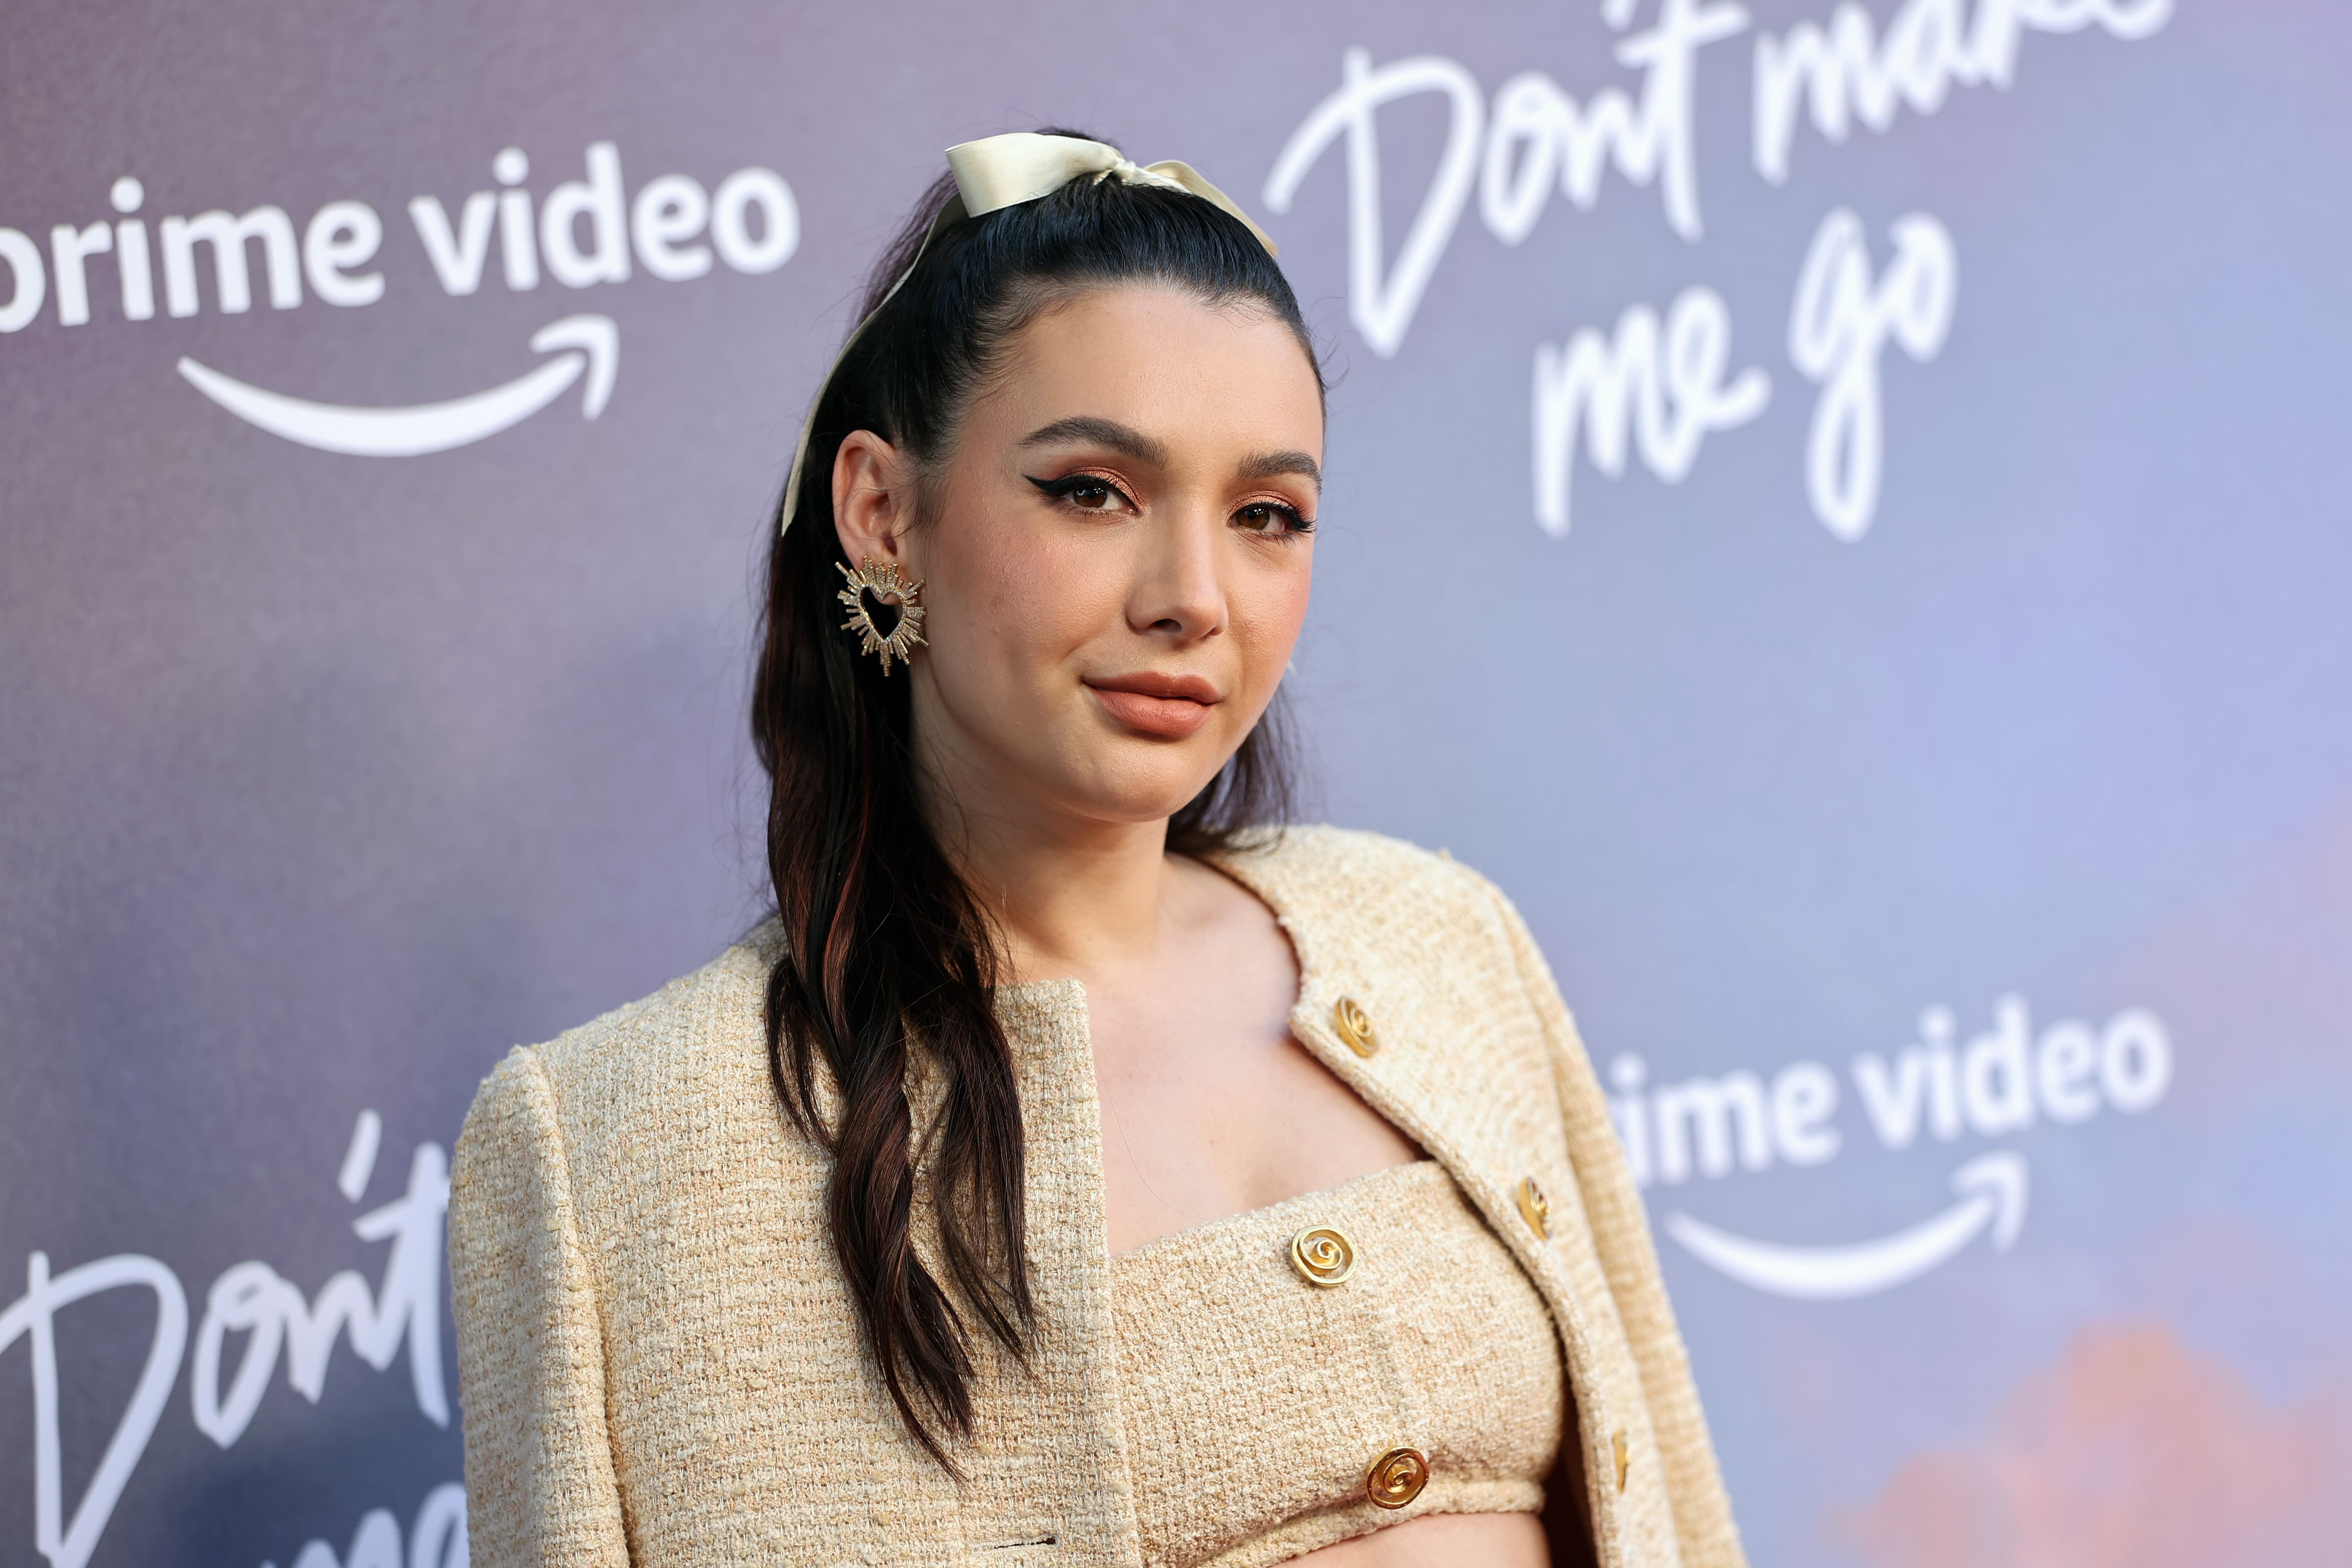 Hannah Marks Directing 'Turtles All the Way Down' Movie for Fox